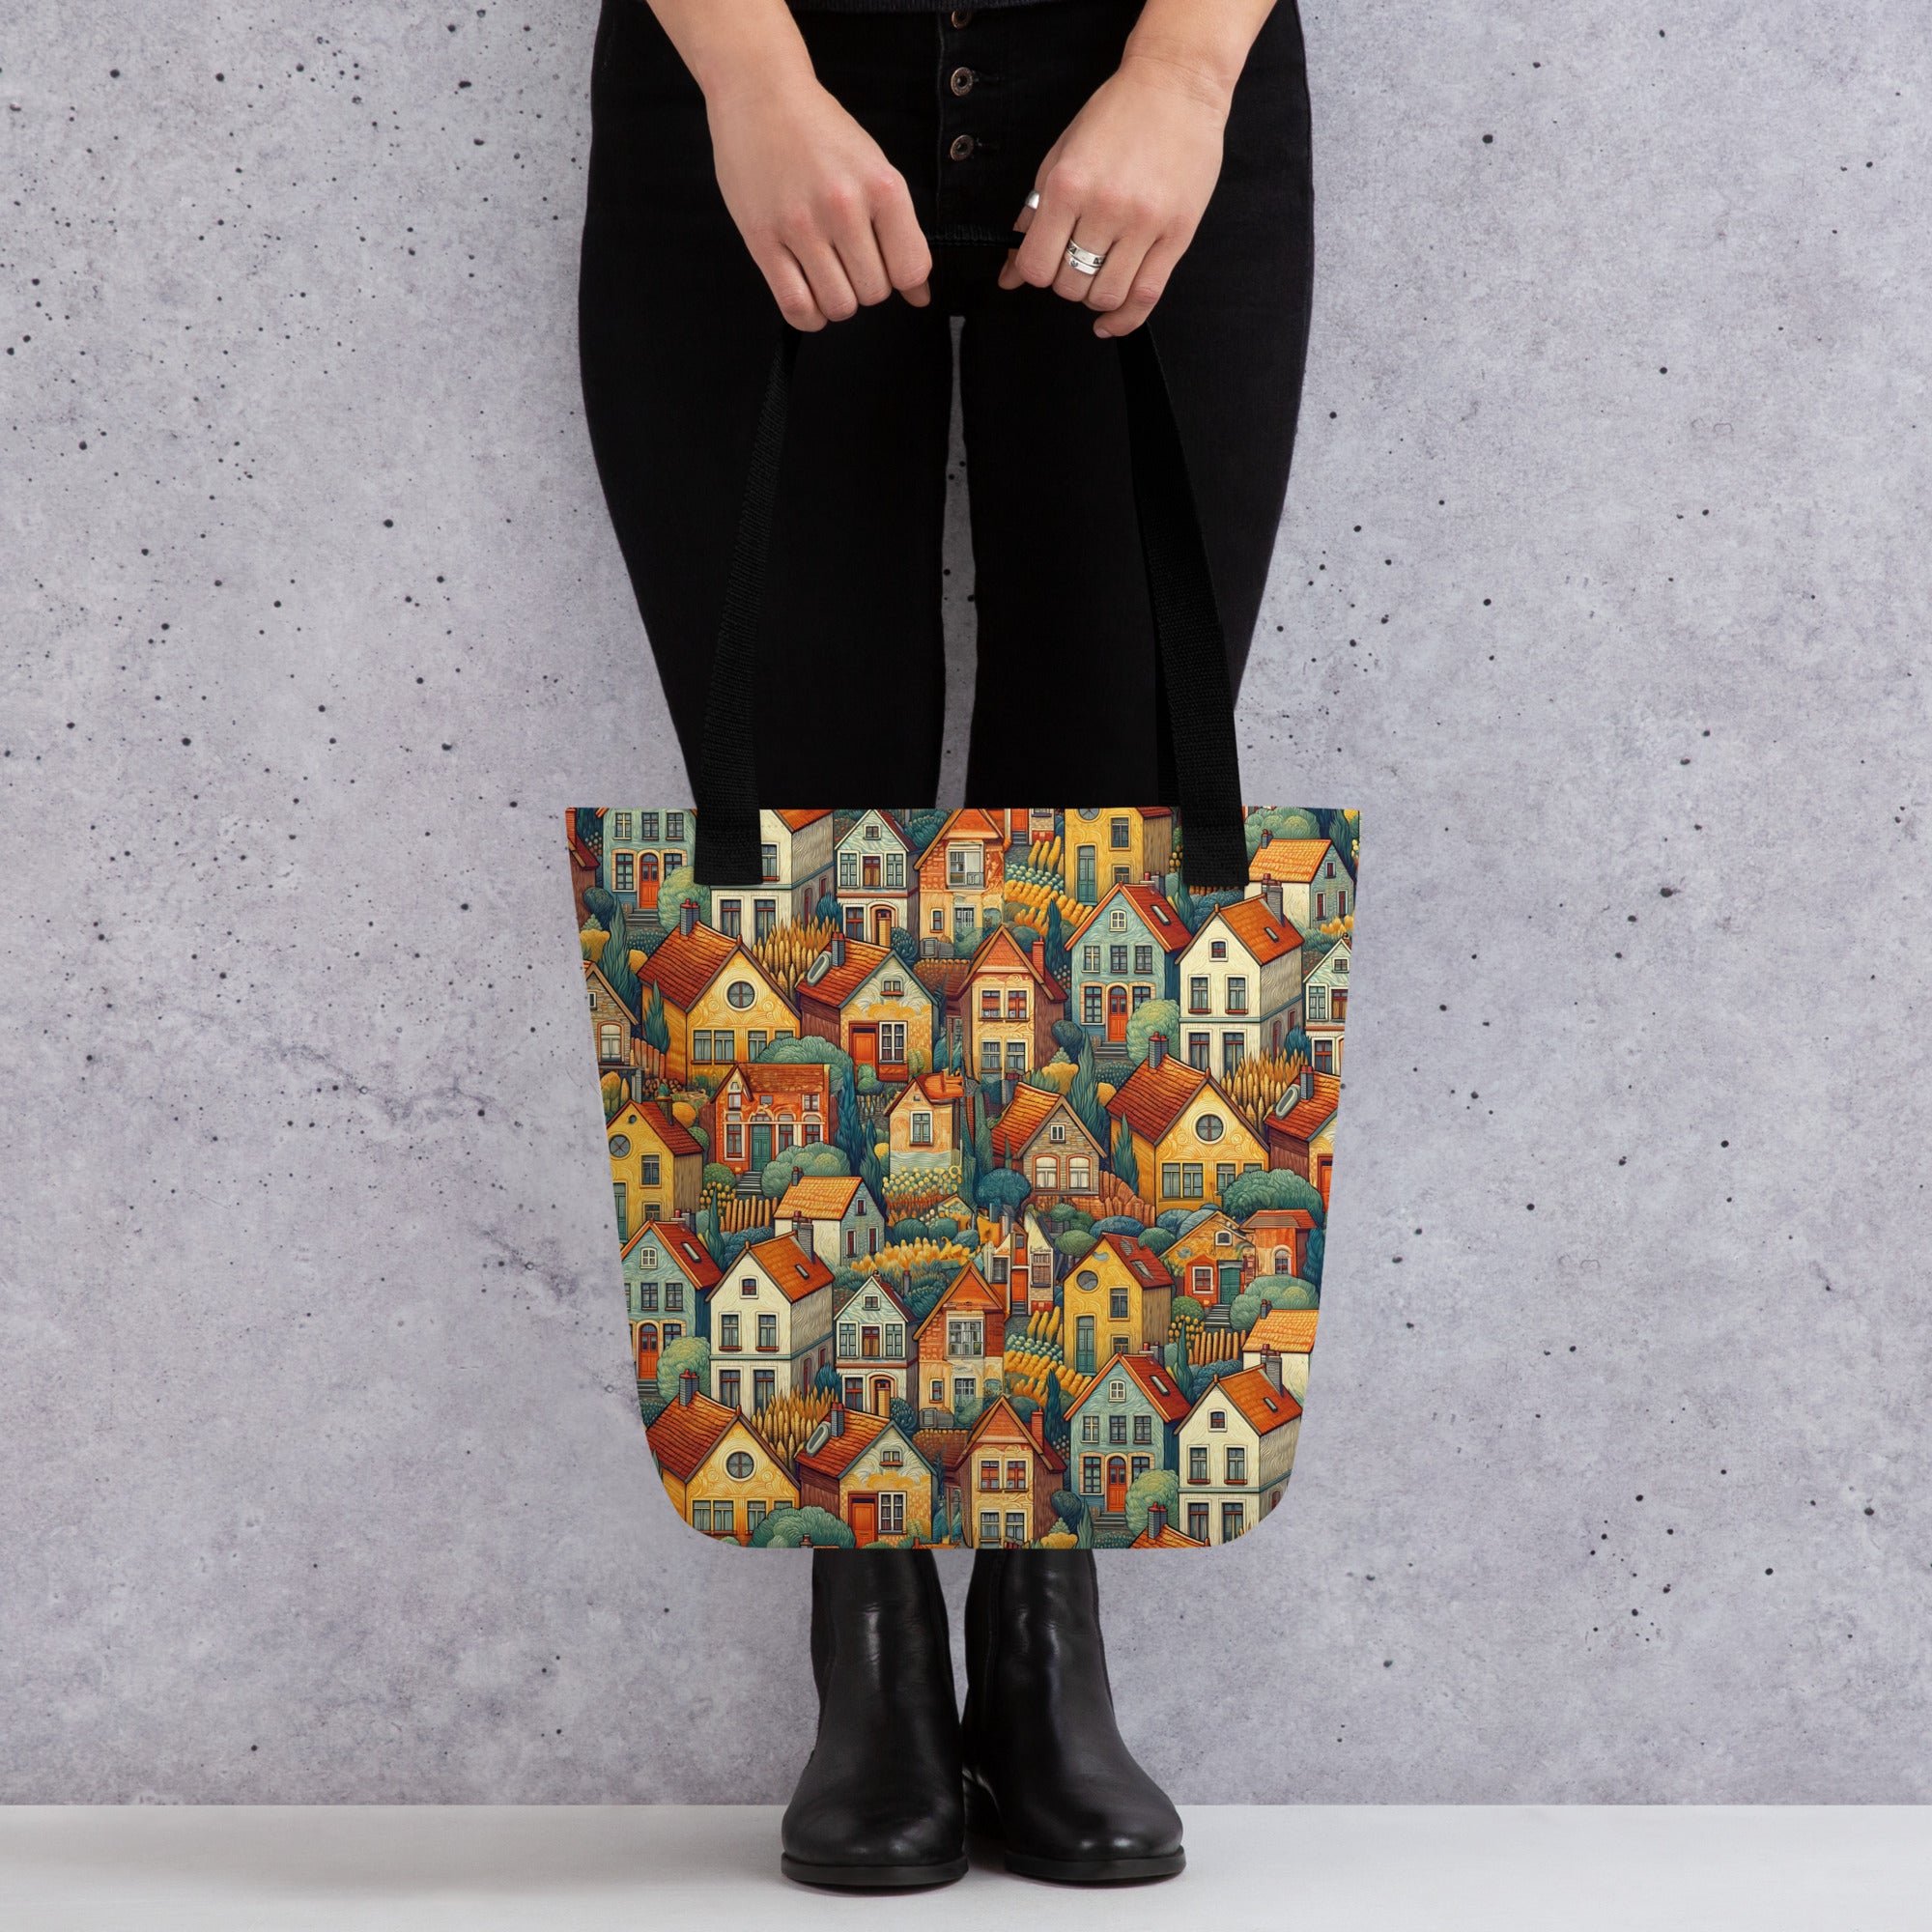 Vincent van Gogh 'Houses at Auvers' Famous Painting Totebag | Allover Print Art Tote Bag